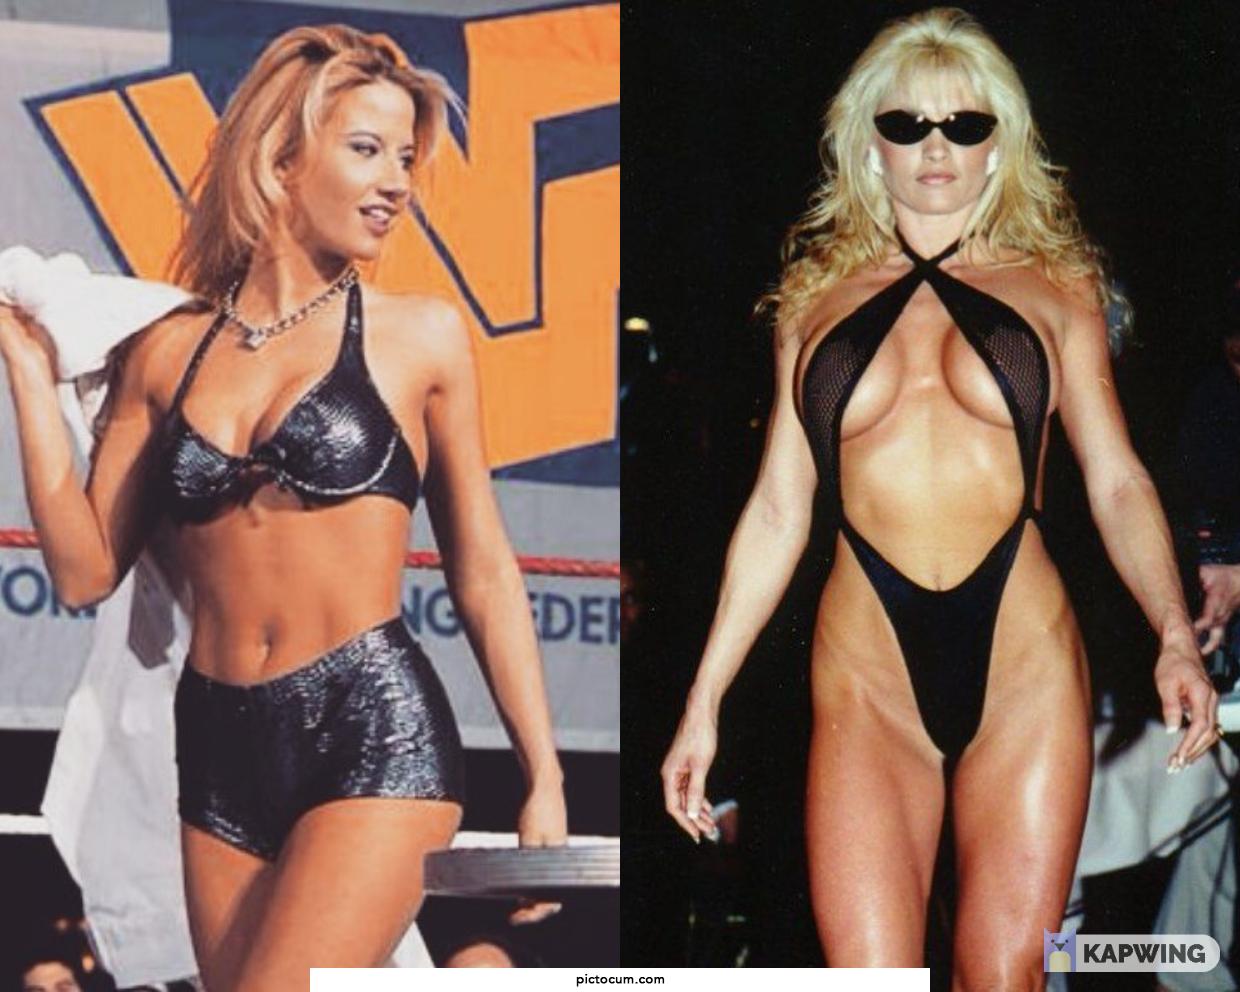 Old school WWF fans. Who got more of your loads back in the day, Sunny or Sable?